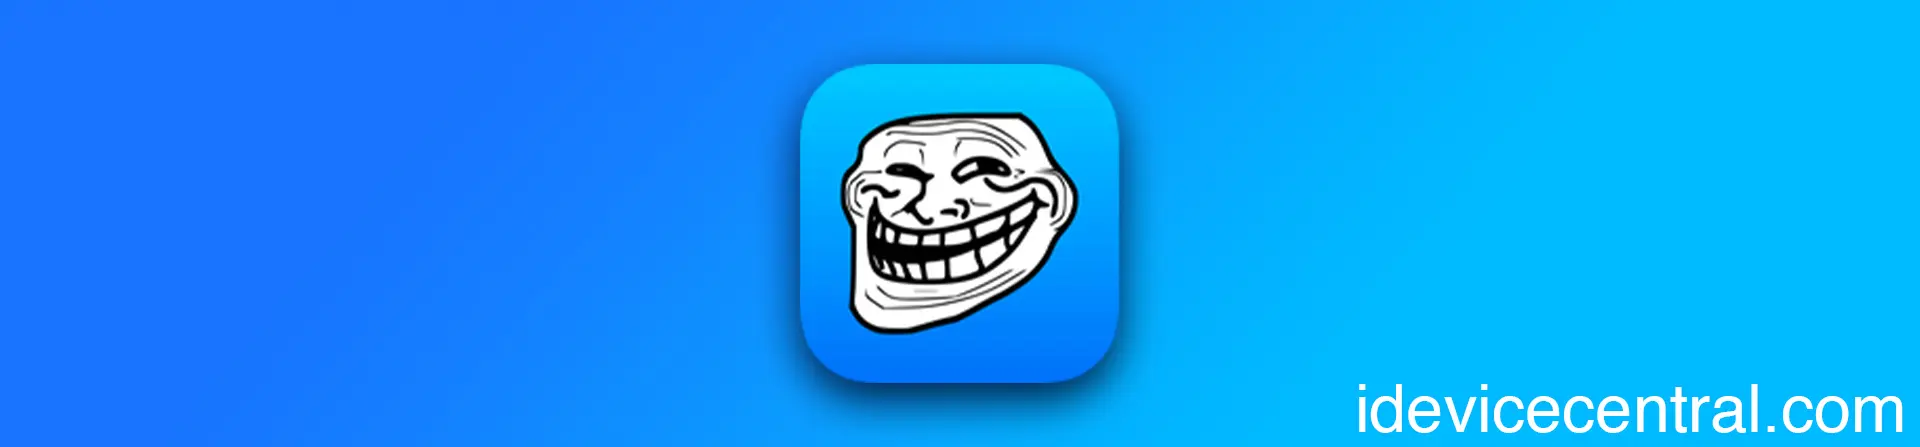 TrollStore for iOS 15.5-16.6.1 and iOS 17.0